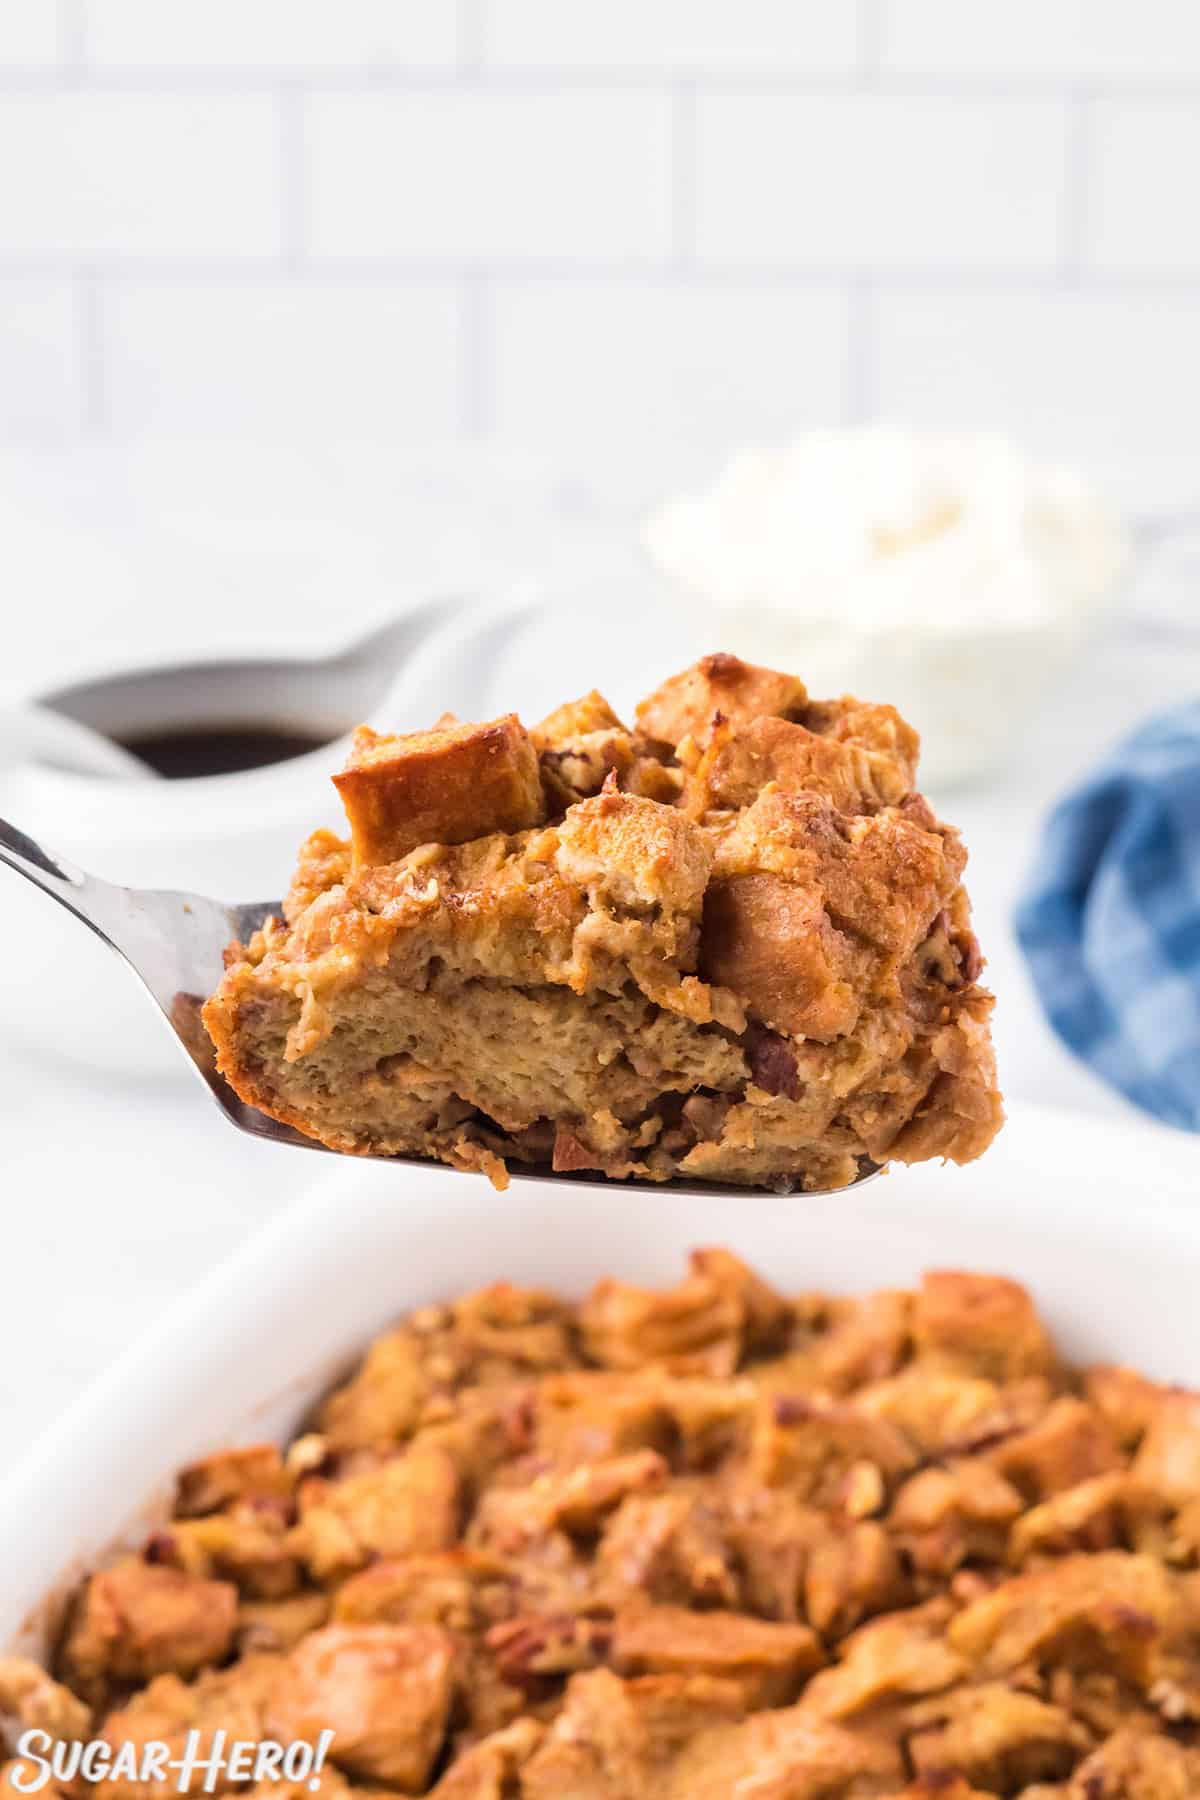 Spatula holding a slice of Pumpkin Bread Pudding over a dish of baked bread pudding.